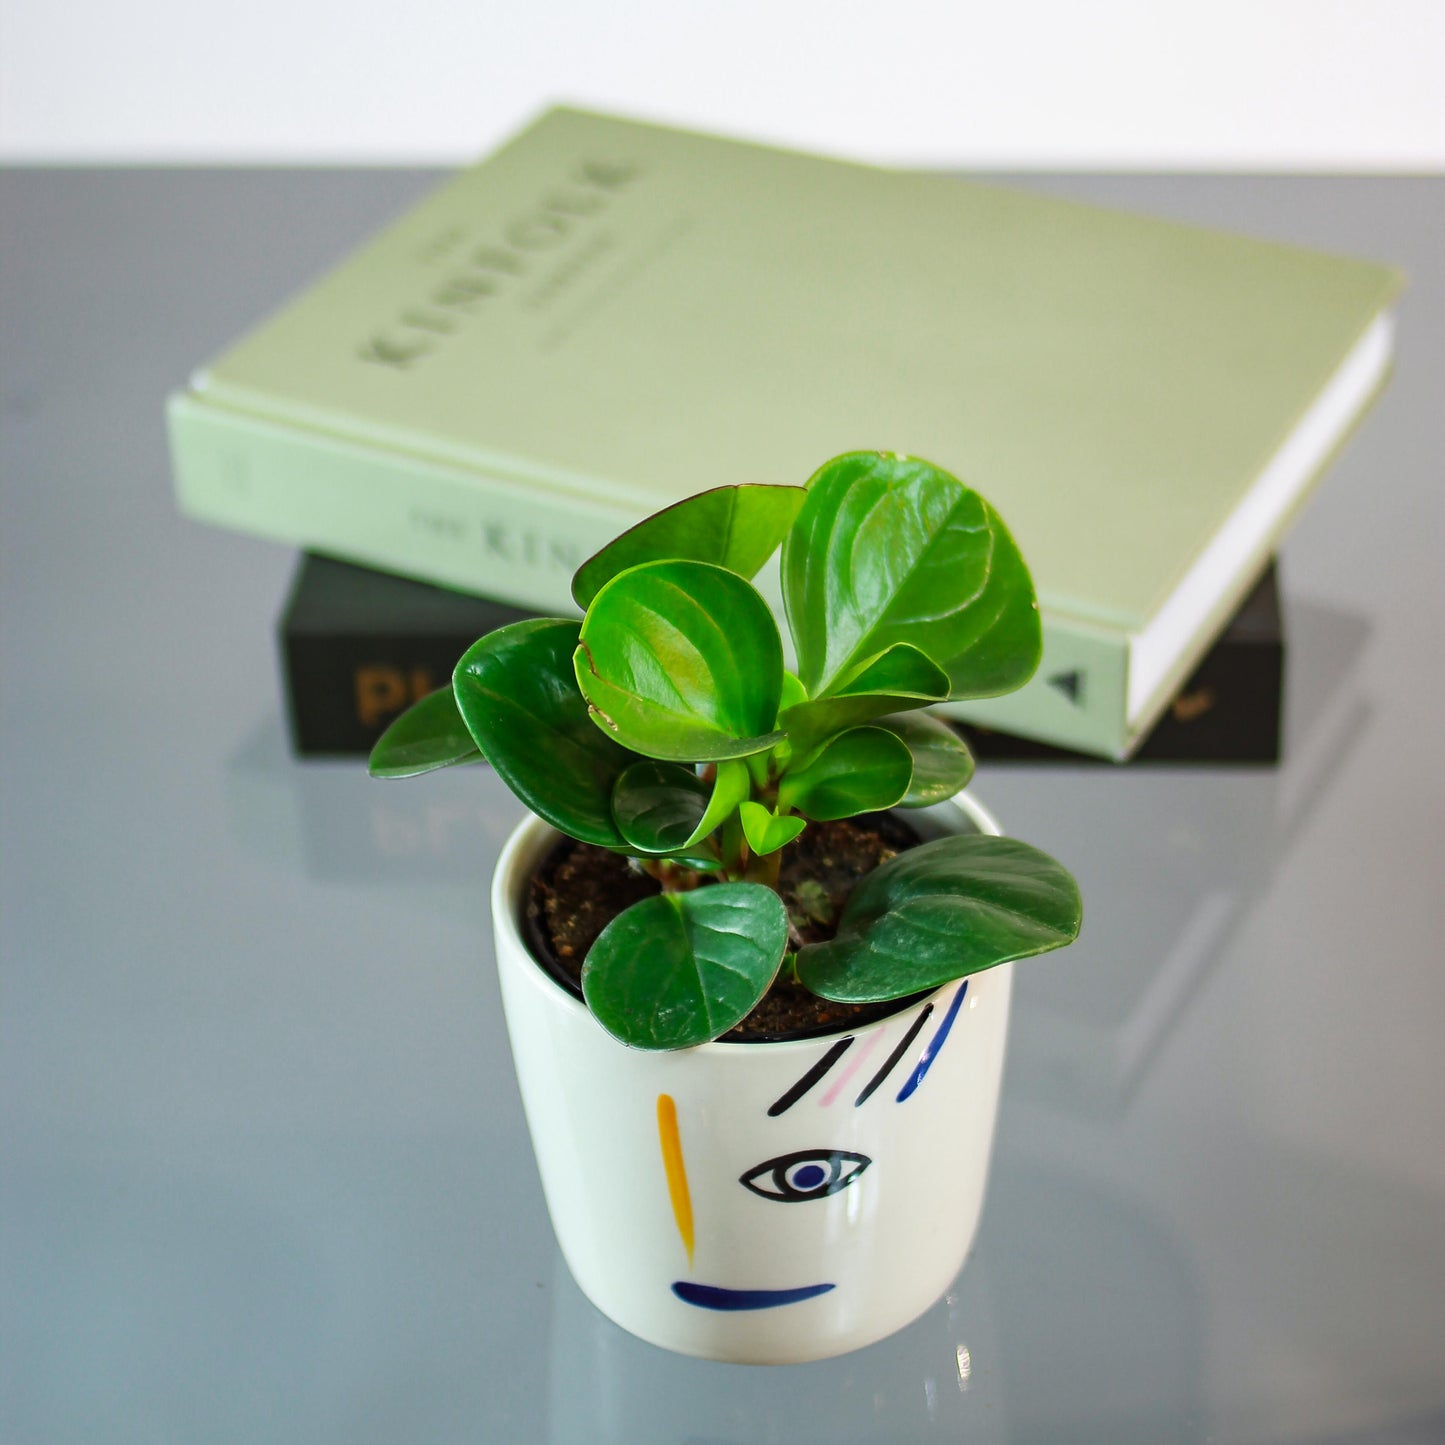 Green Baby Rubber Plant (Peperomia obtusifolia 'Red Edge') in a 4 inch pot. Indoor plant for sale by Promise Supply for delivery and pickup in Toronto